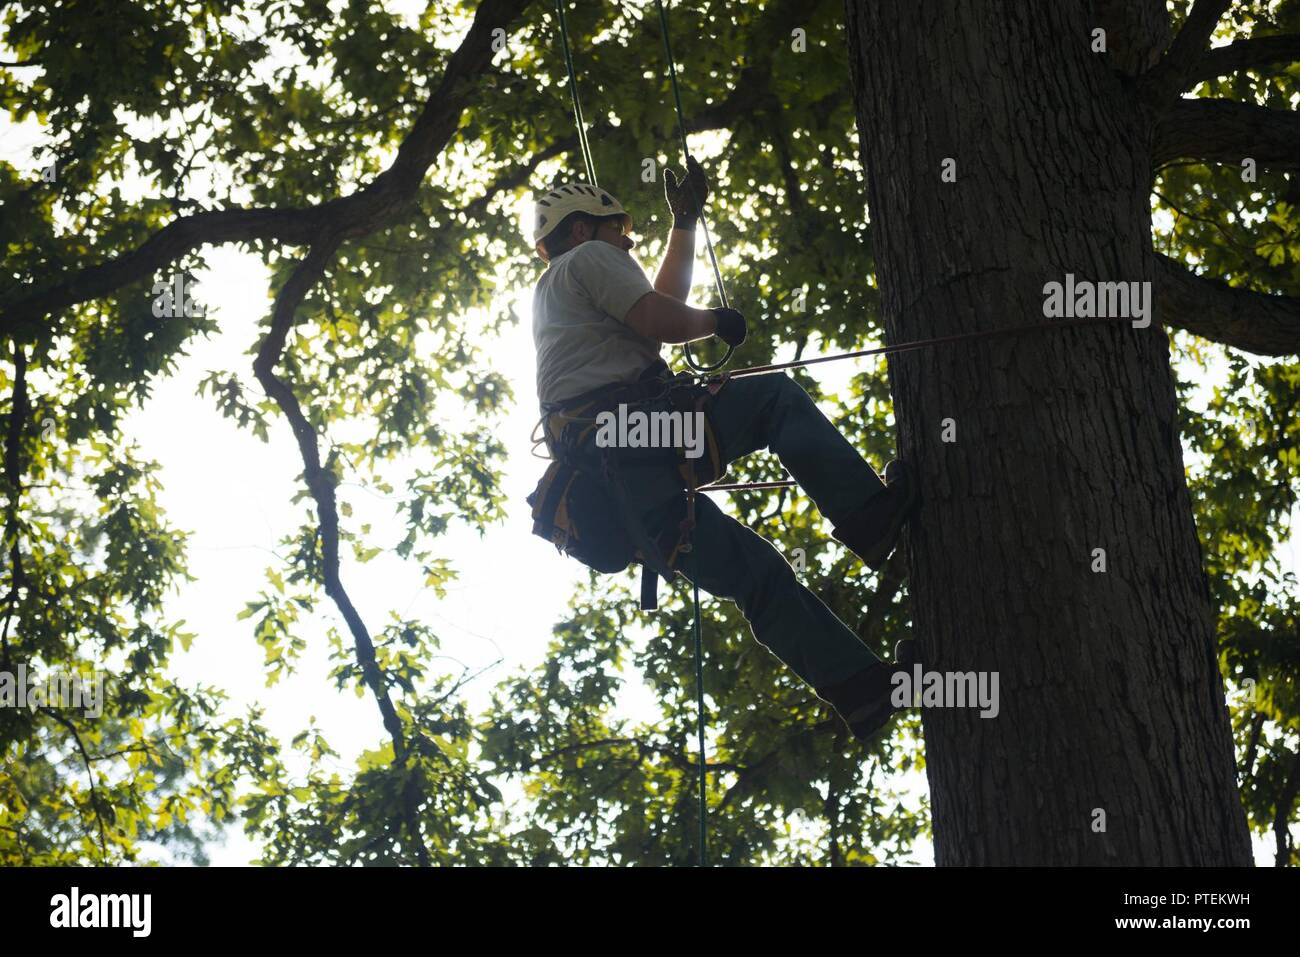 Stephen Paeke, Joshua Tree Professional Tree and Lawn Care, helps install a lightning protection system in a large oak tree in Section 30 of Arlington National Cemetery, Arlington, Va., July 17, 2017.  During the National Association of Landscape Professionals’ 21th annual Renewal and Remembrance, about 10 large oak trees in four separate sections received lightning protection systems. Stock Photo